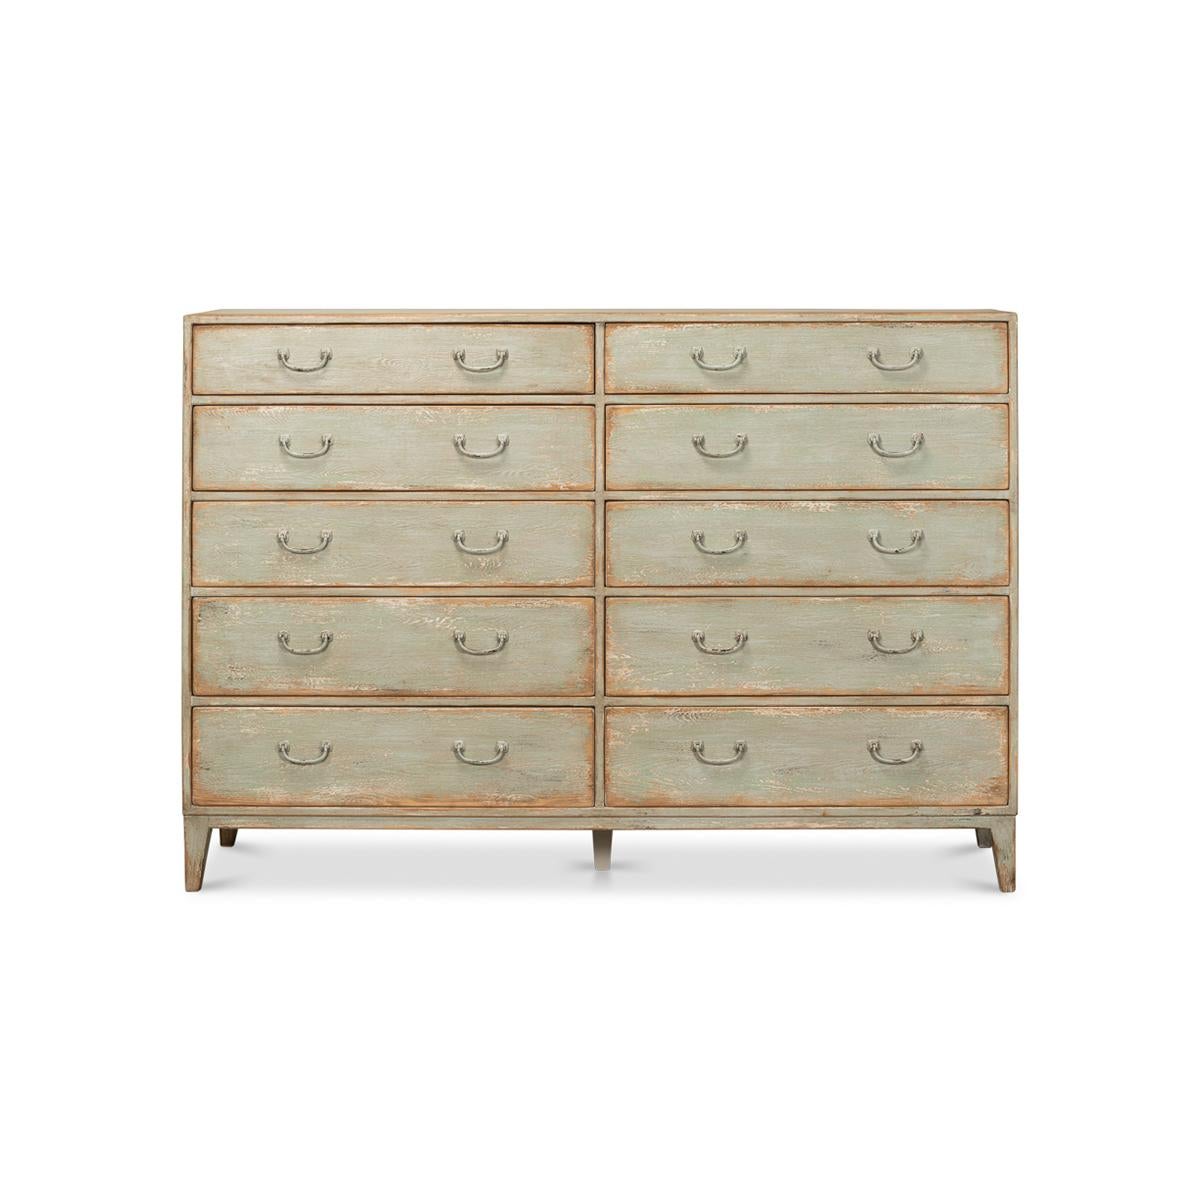 A rustic painted chest of drawers crafted from pine. This beautiful piece has been given an antique finish in a sage green color. It boasts eight drawers making it the perfect piece to maximize storage. 

Dimensions: 72